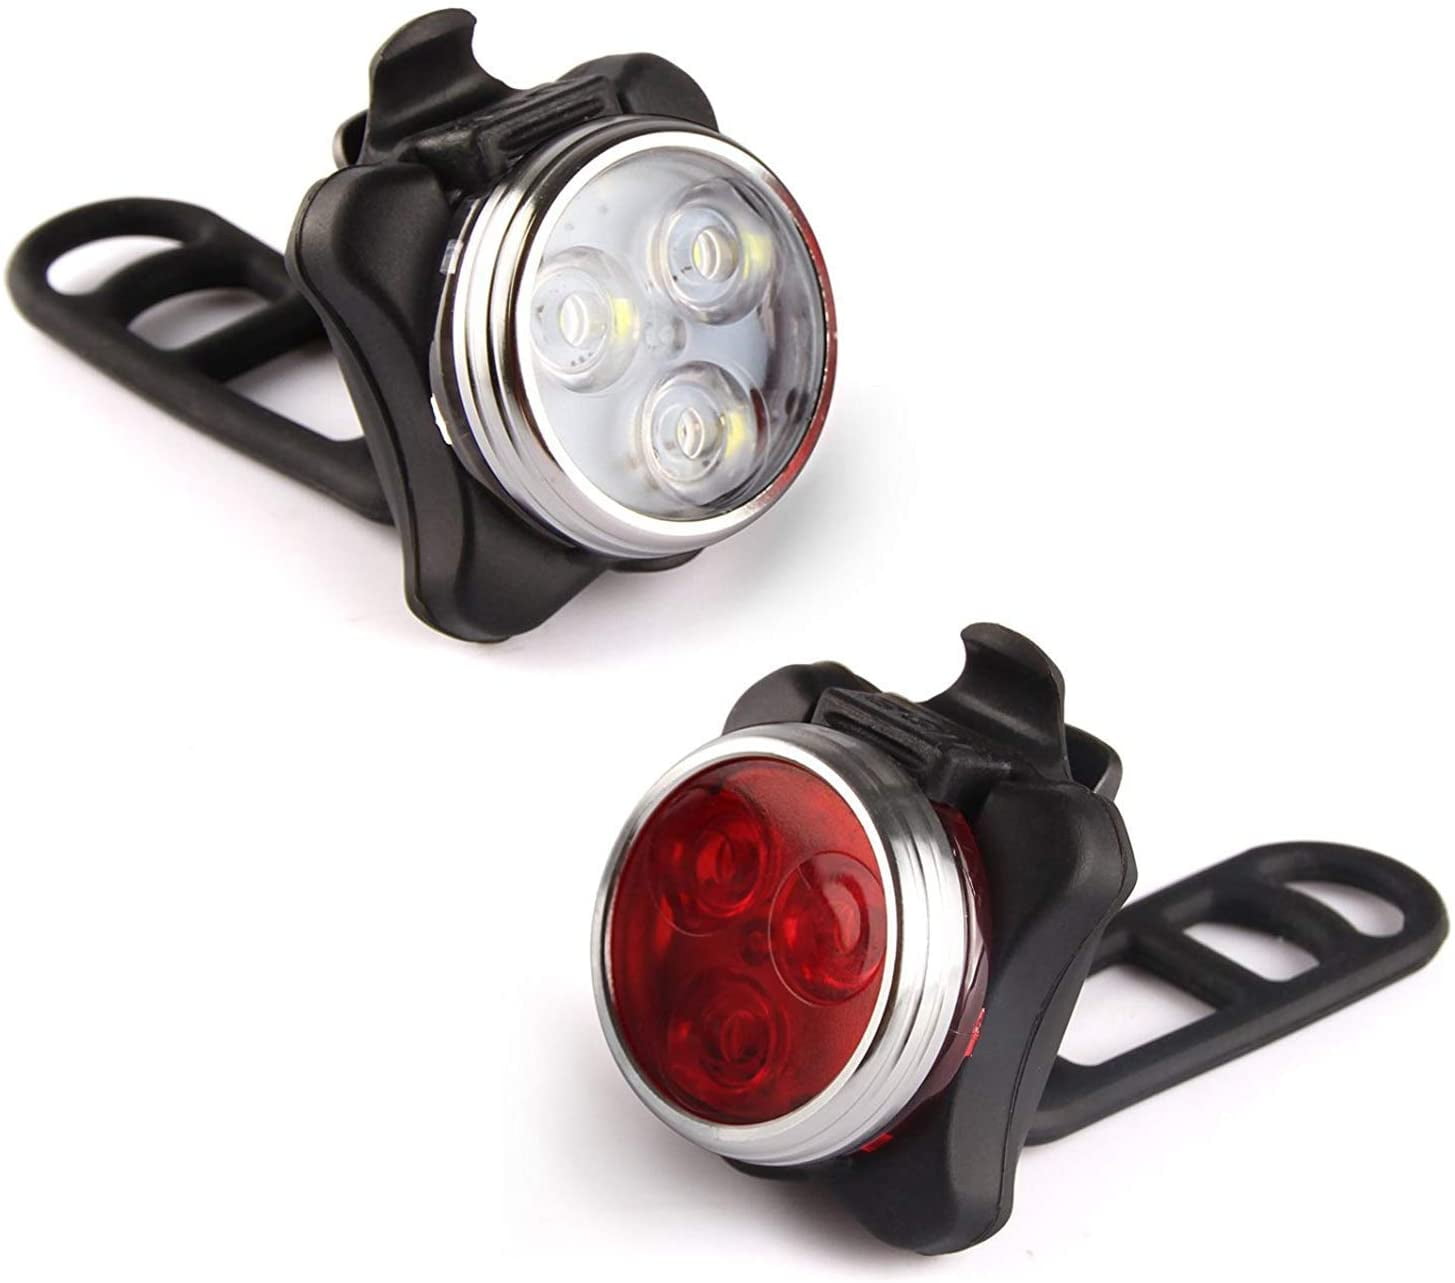 Insten Bicycle Front Light Super Bright 5 LED Headlight with 7 Operating Modes